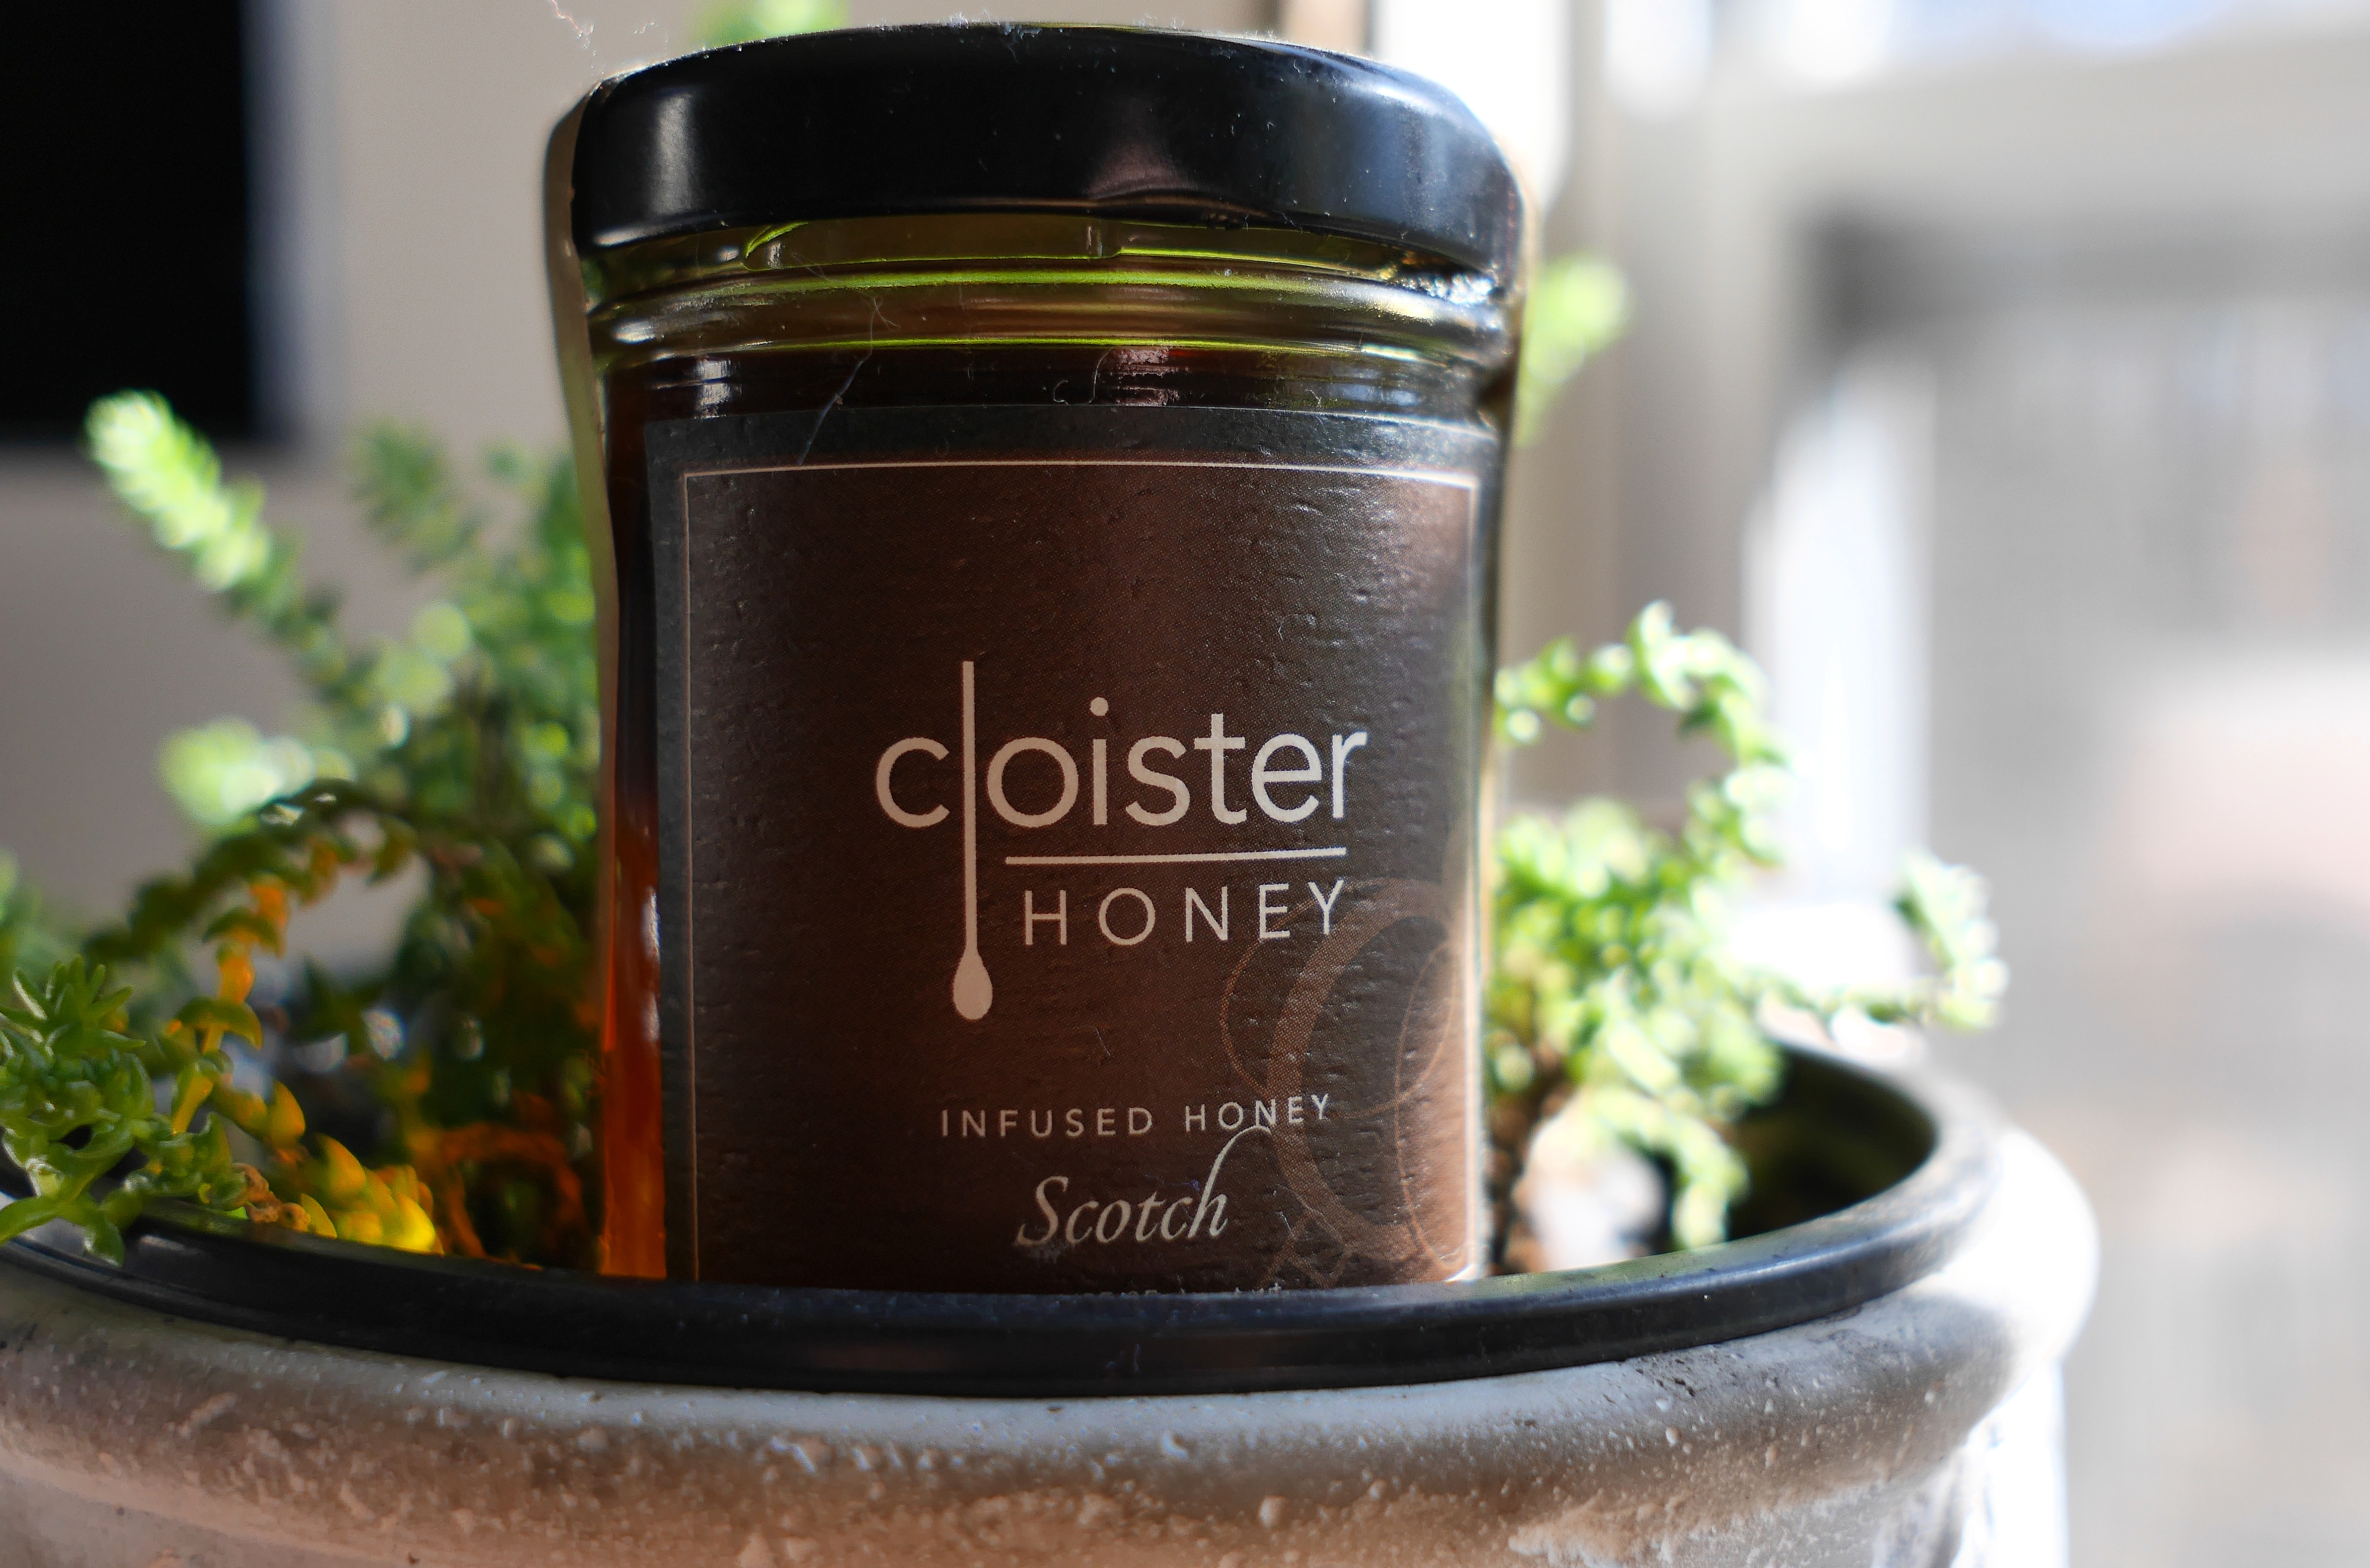 Cloister Infused Scotch Honey Review